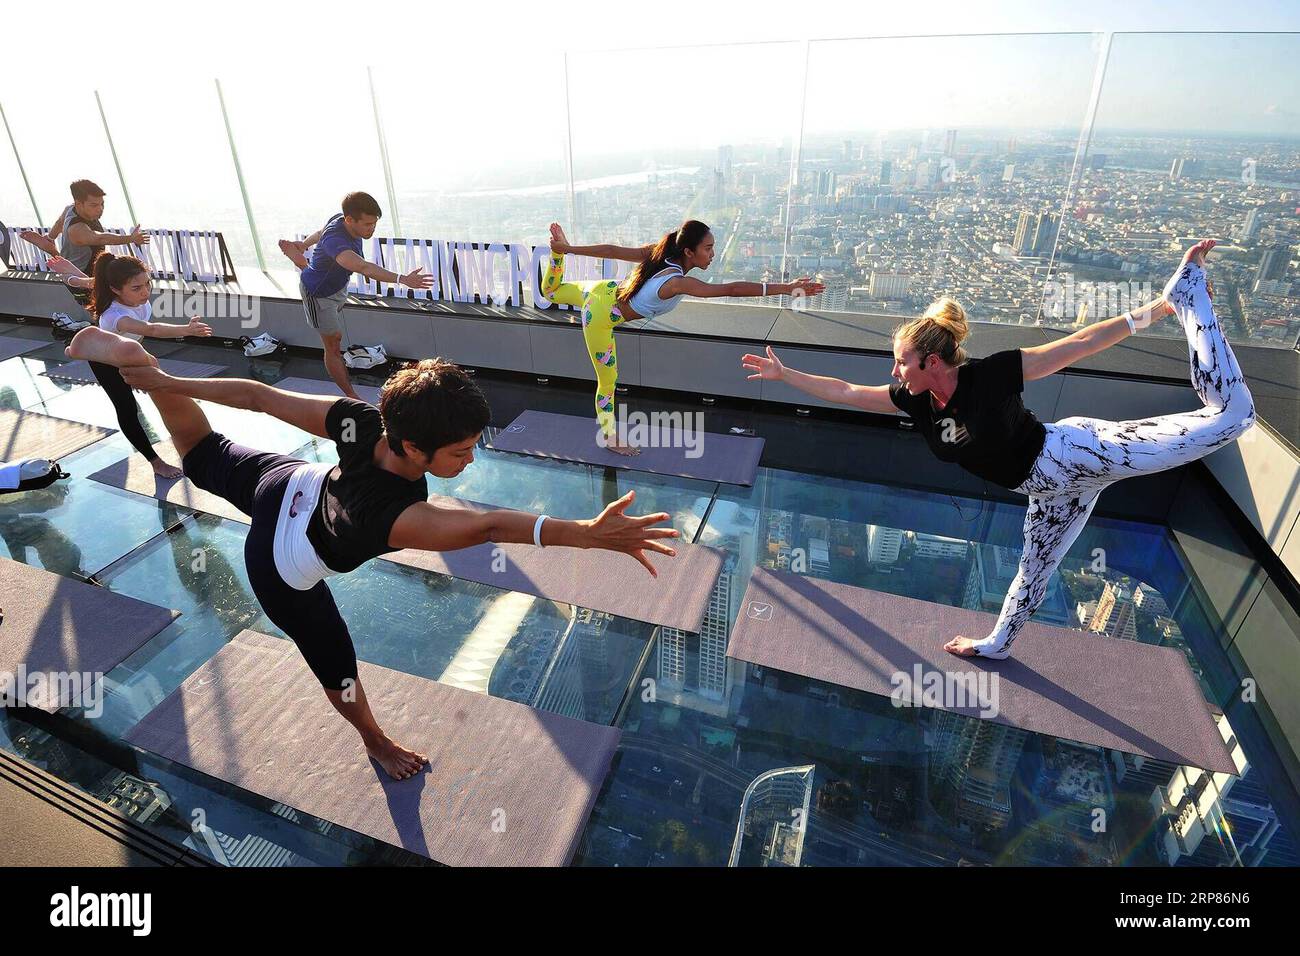 (190220) -- BEIJING, Feb. 20, 2019 (Xinhua) -- People practice yoga at an observation deck on the rooftop of a skyscraper in Bangkok, capital of Thailand, Feb. 19, 2019. (Xinhua/Rachen Sageamsak) XINHUA PHOTOS OF THE DAY PUBLICATIONxNOTxINxCHN Stock Photo